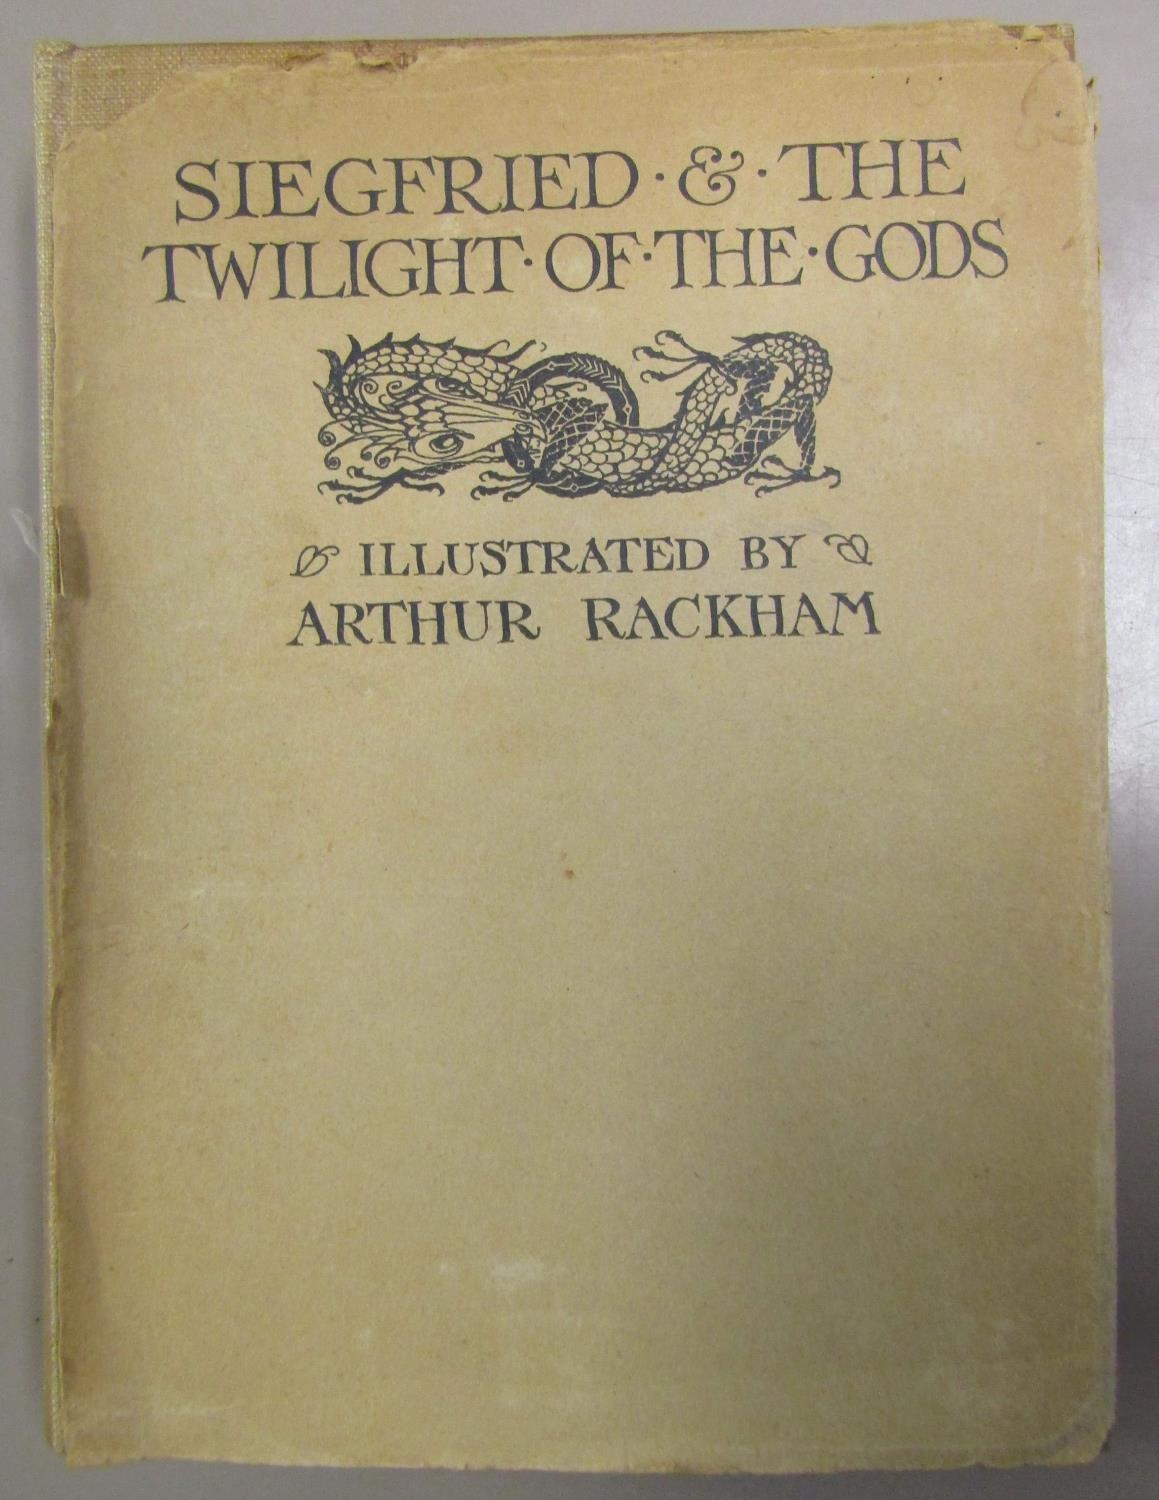 Books about/illustrated by Arthur Rackham including Siegfried The Twilight Of The Gods, The Rhine - Image 8 of 9